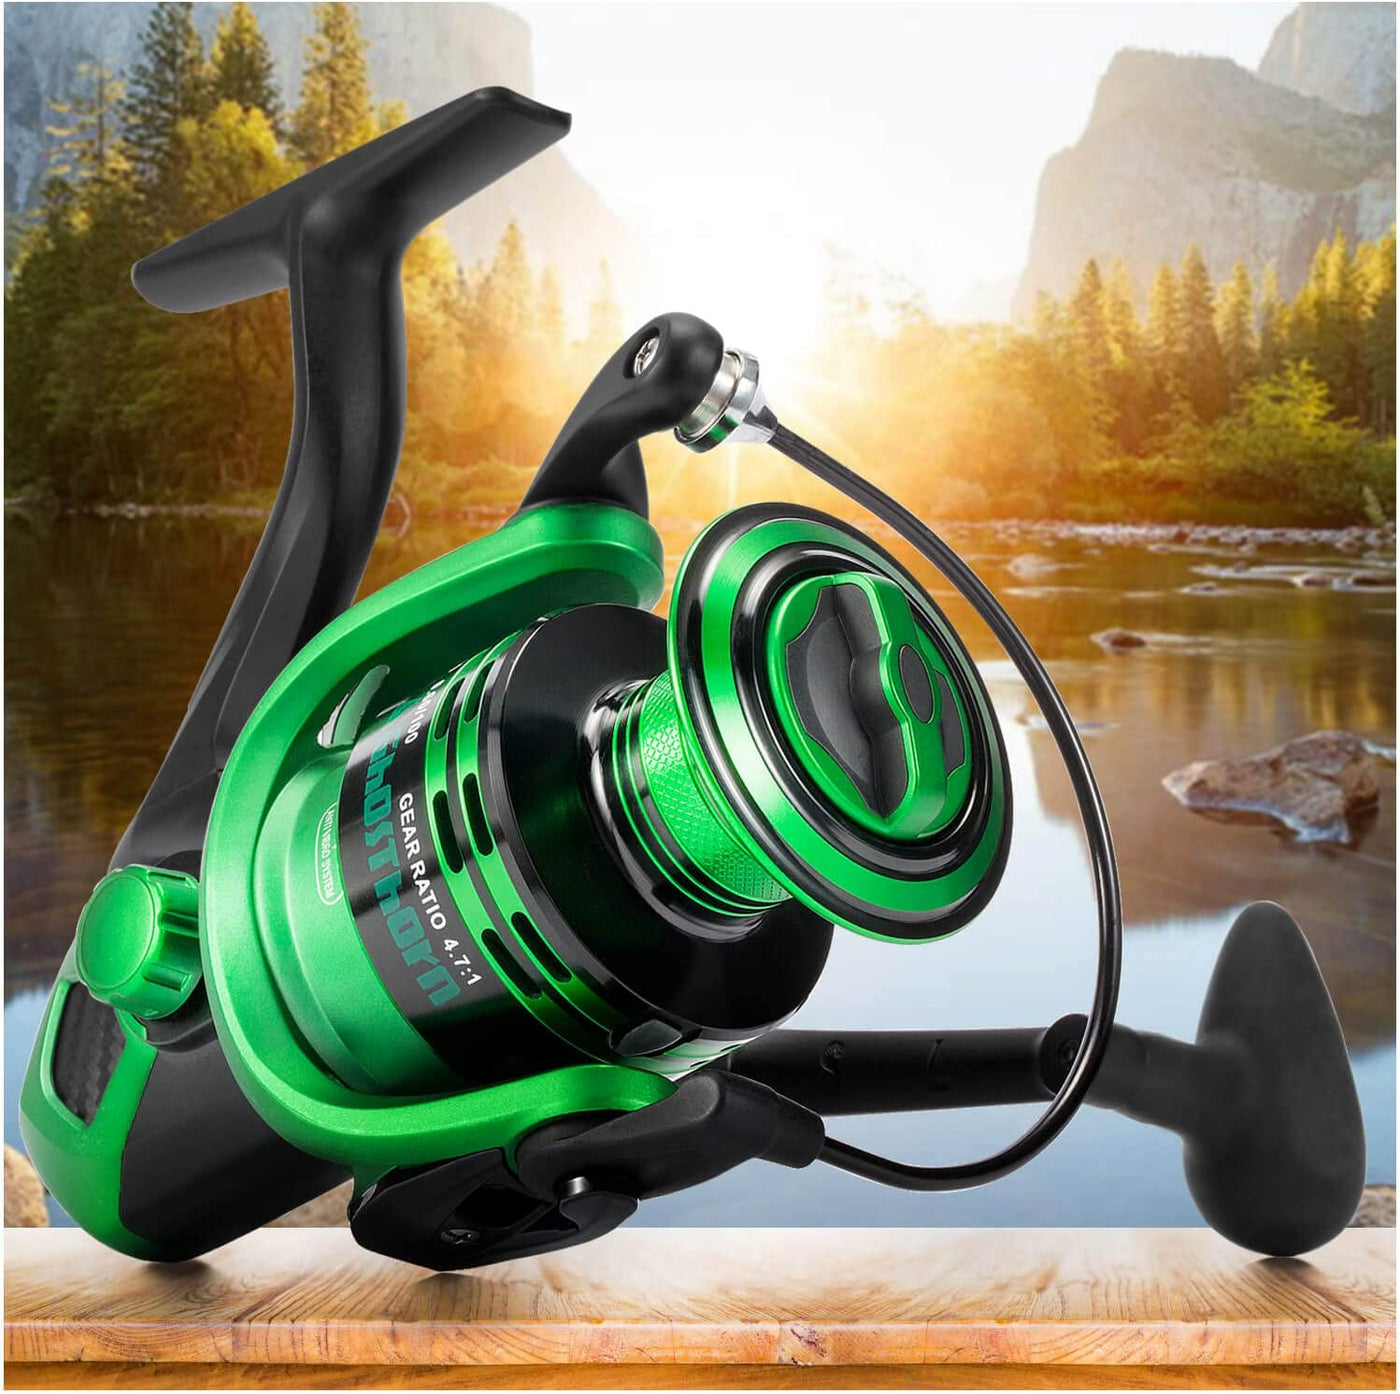 3 Piece Ghosthorn Fishing Rod and Reel Combo, Baitcasting Reel Travel  Fishing Rod Portable Kit for Anglers Fishing Gifts for Men Women